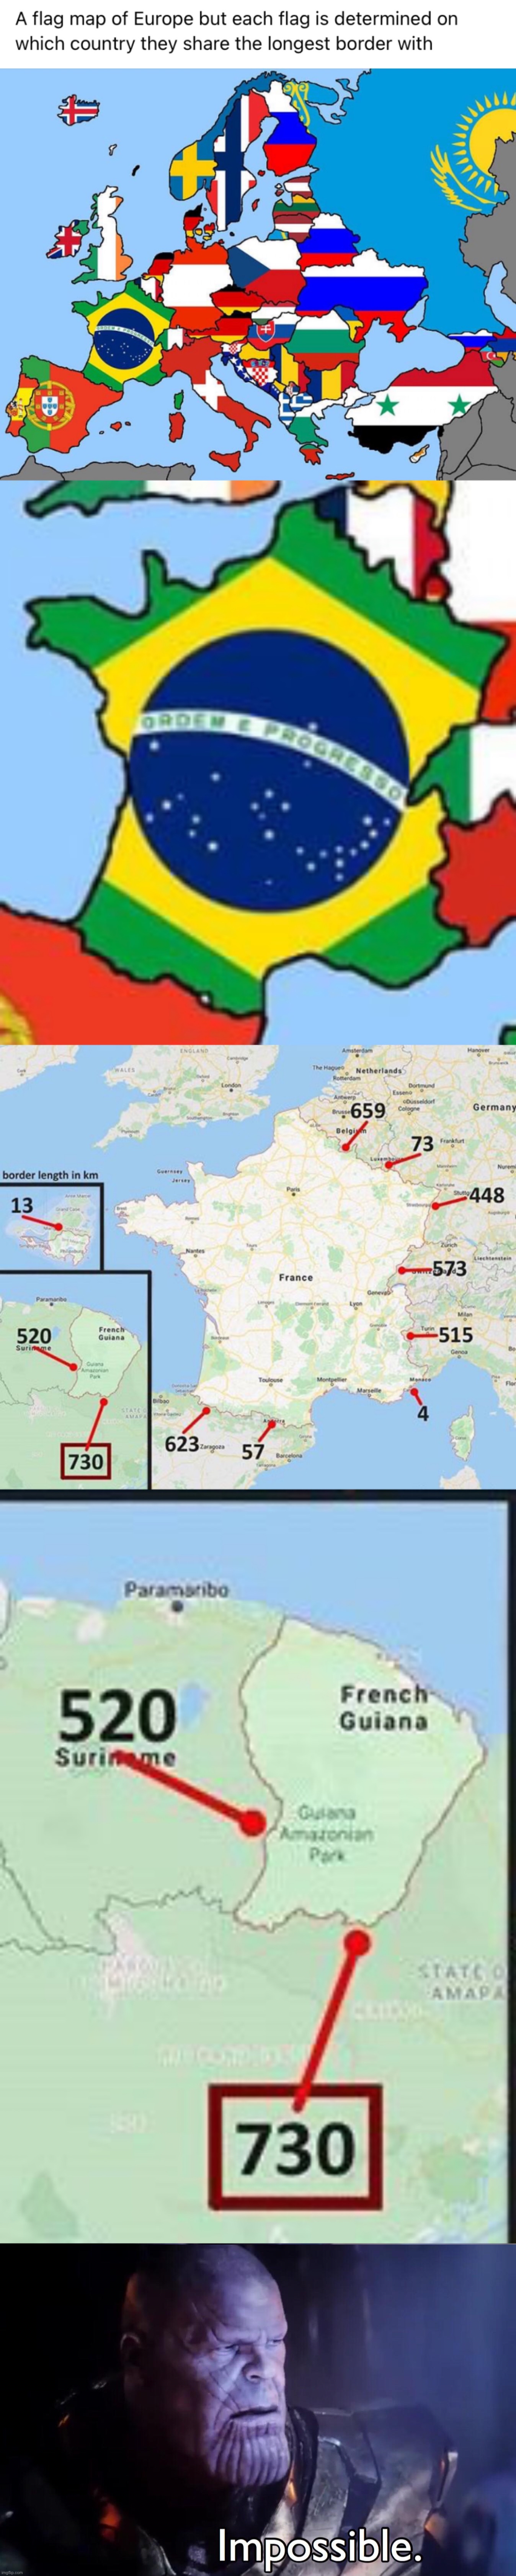 Impossible | image tagged in france borders brazil extended,thanos impossible,france,brazil,borders,impossible | made w/ Imgflip meme maker